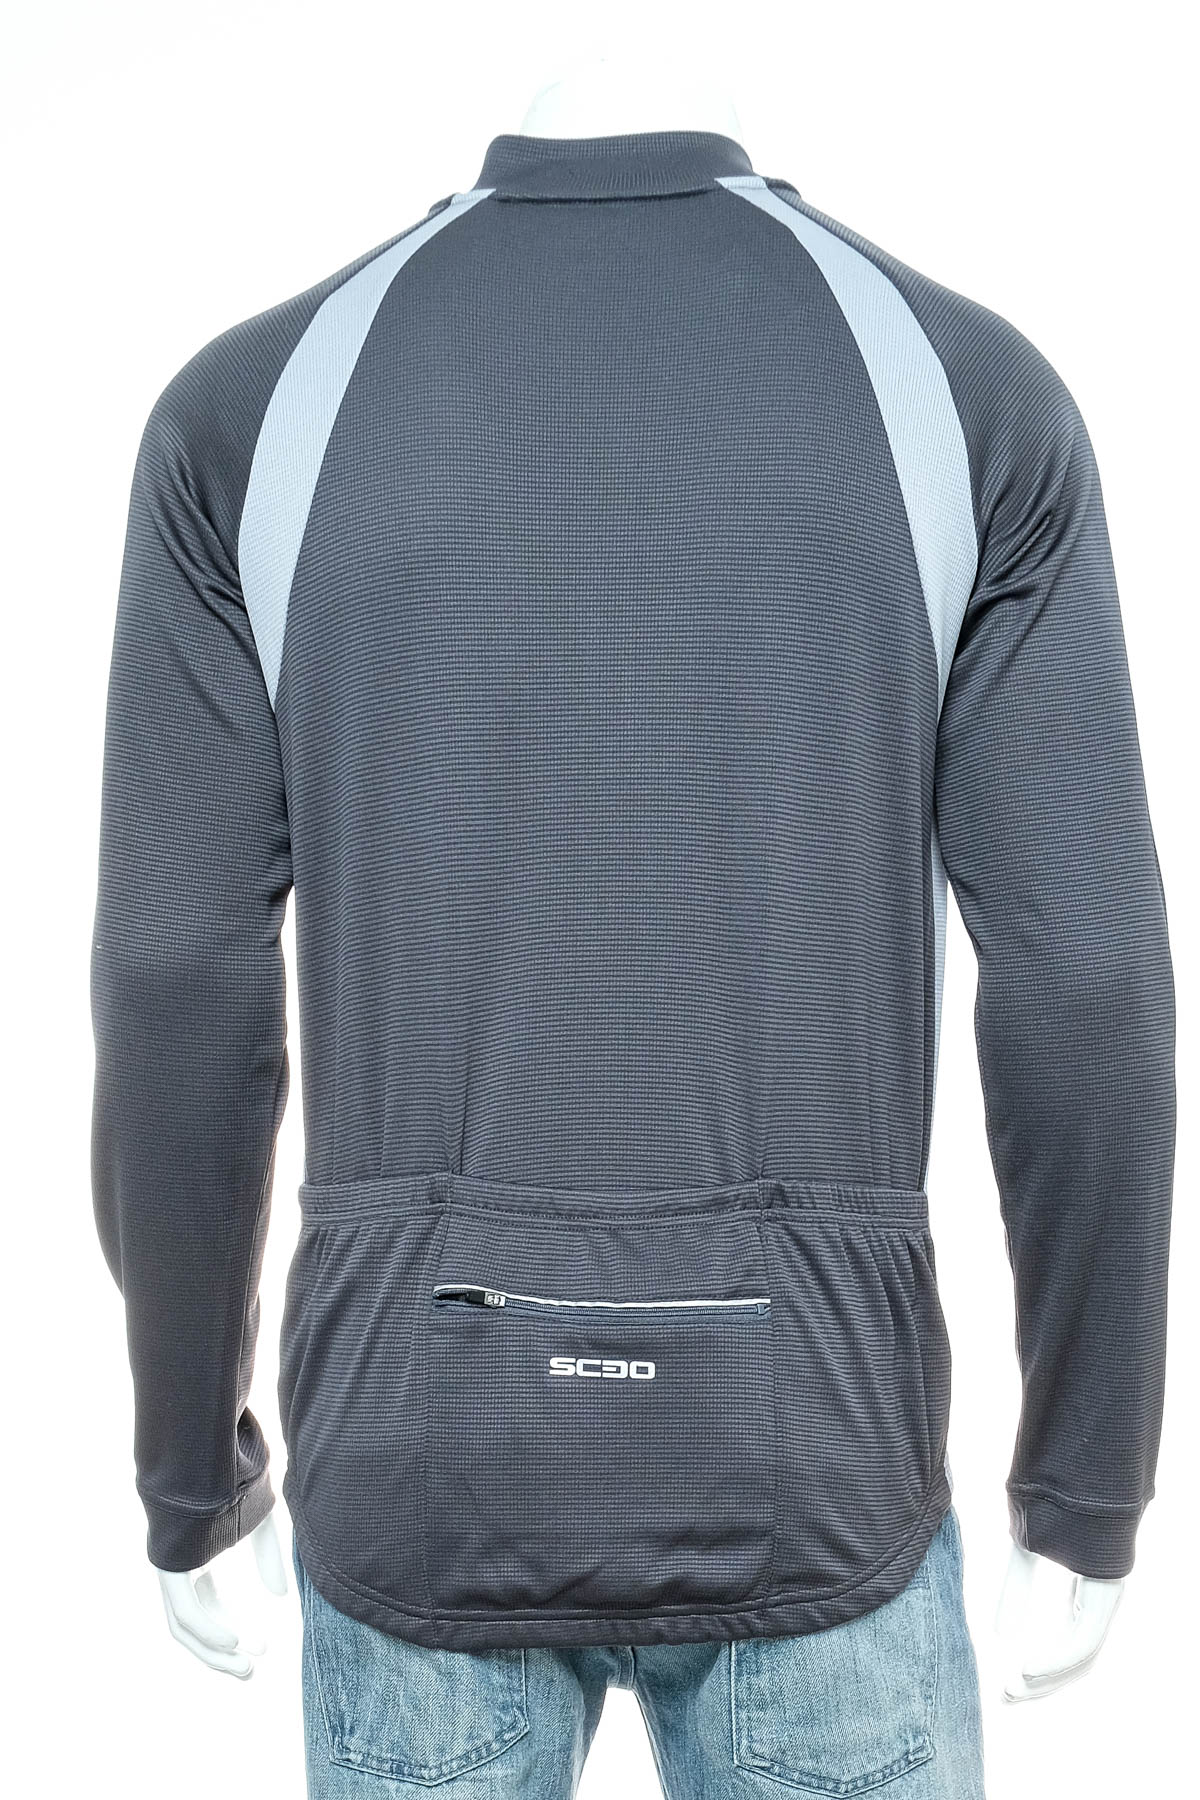 Male sports top for cycling - CRANE SPORTS - 1